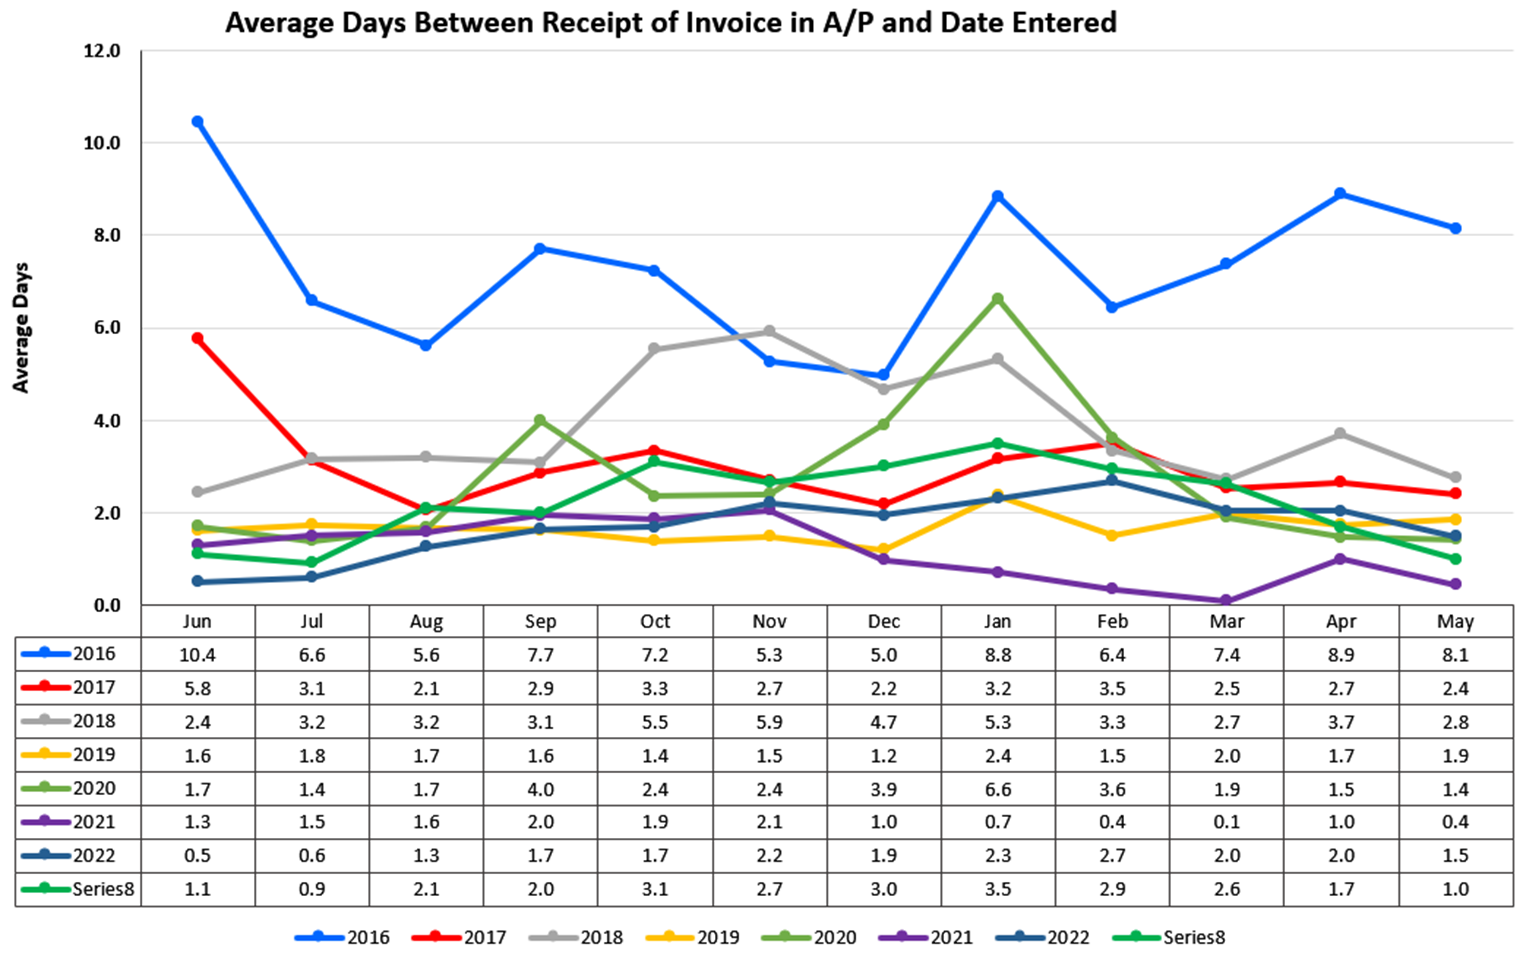 Average Days Between Receipt of Invoice in A/P and Date Entered